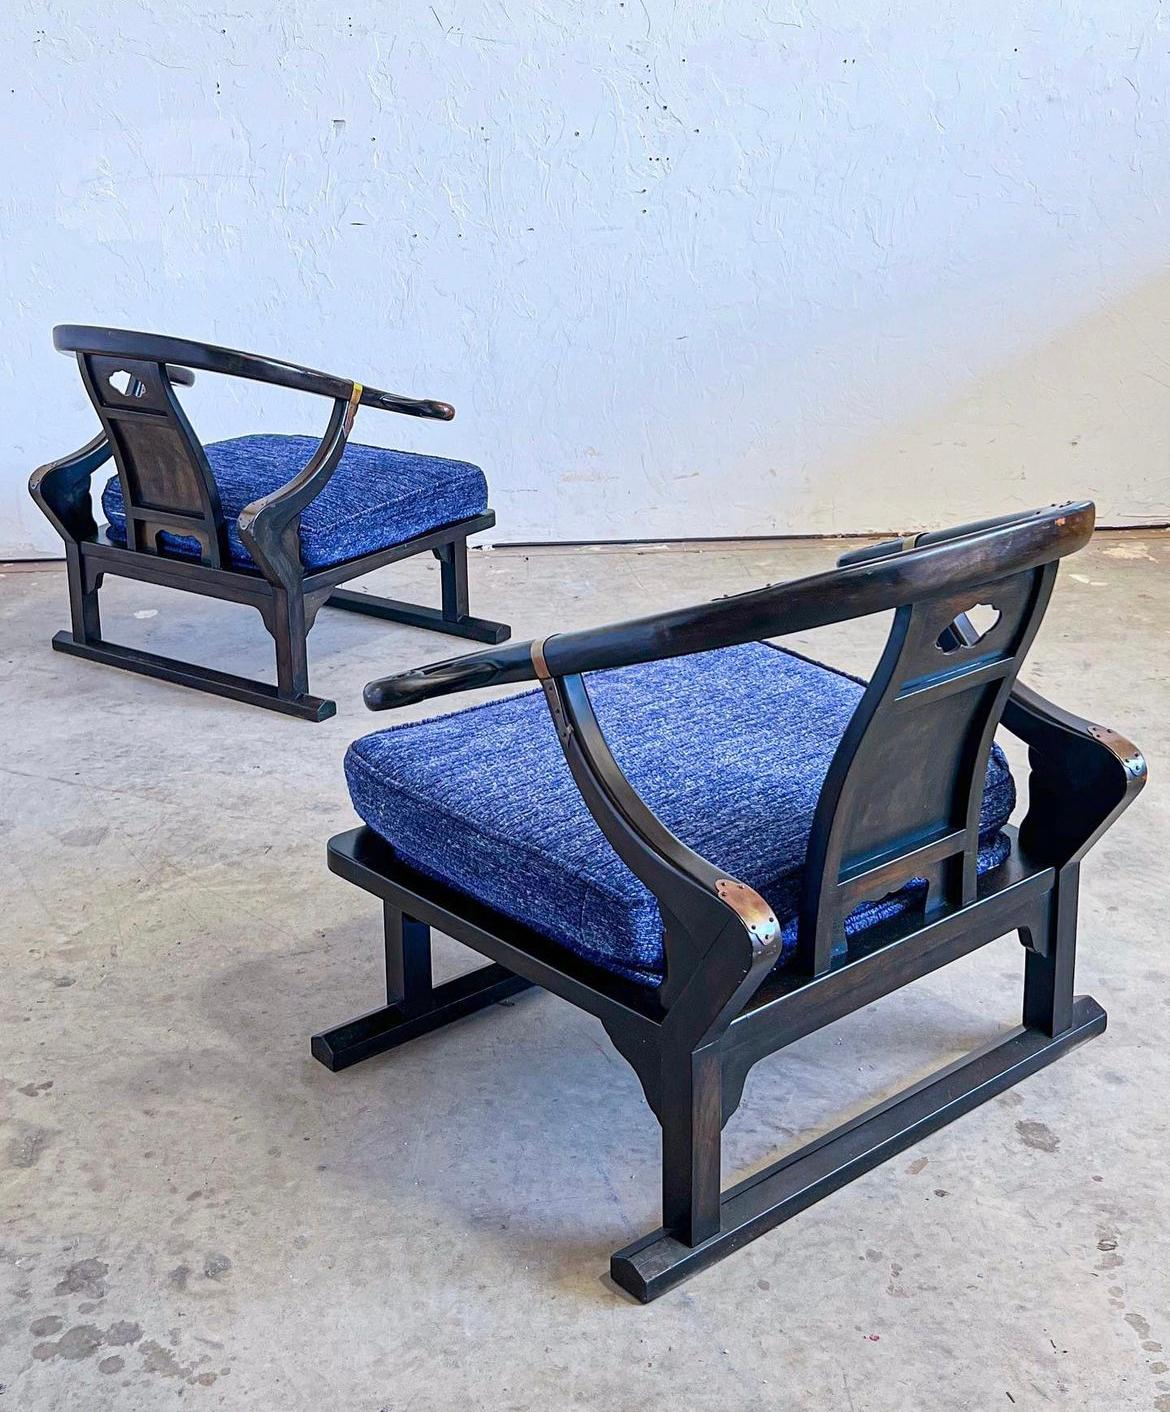 Ebony lounge chairs by Micheal Taylor for Baker, Model 2510, signed.

these ebonized walnut loungers are from their far east collection and have been reupholstered in a royal blue with new foam! the frames are structurally sound with patinated